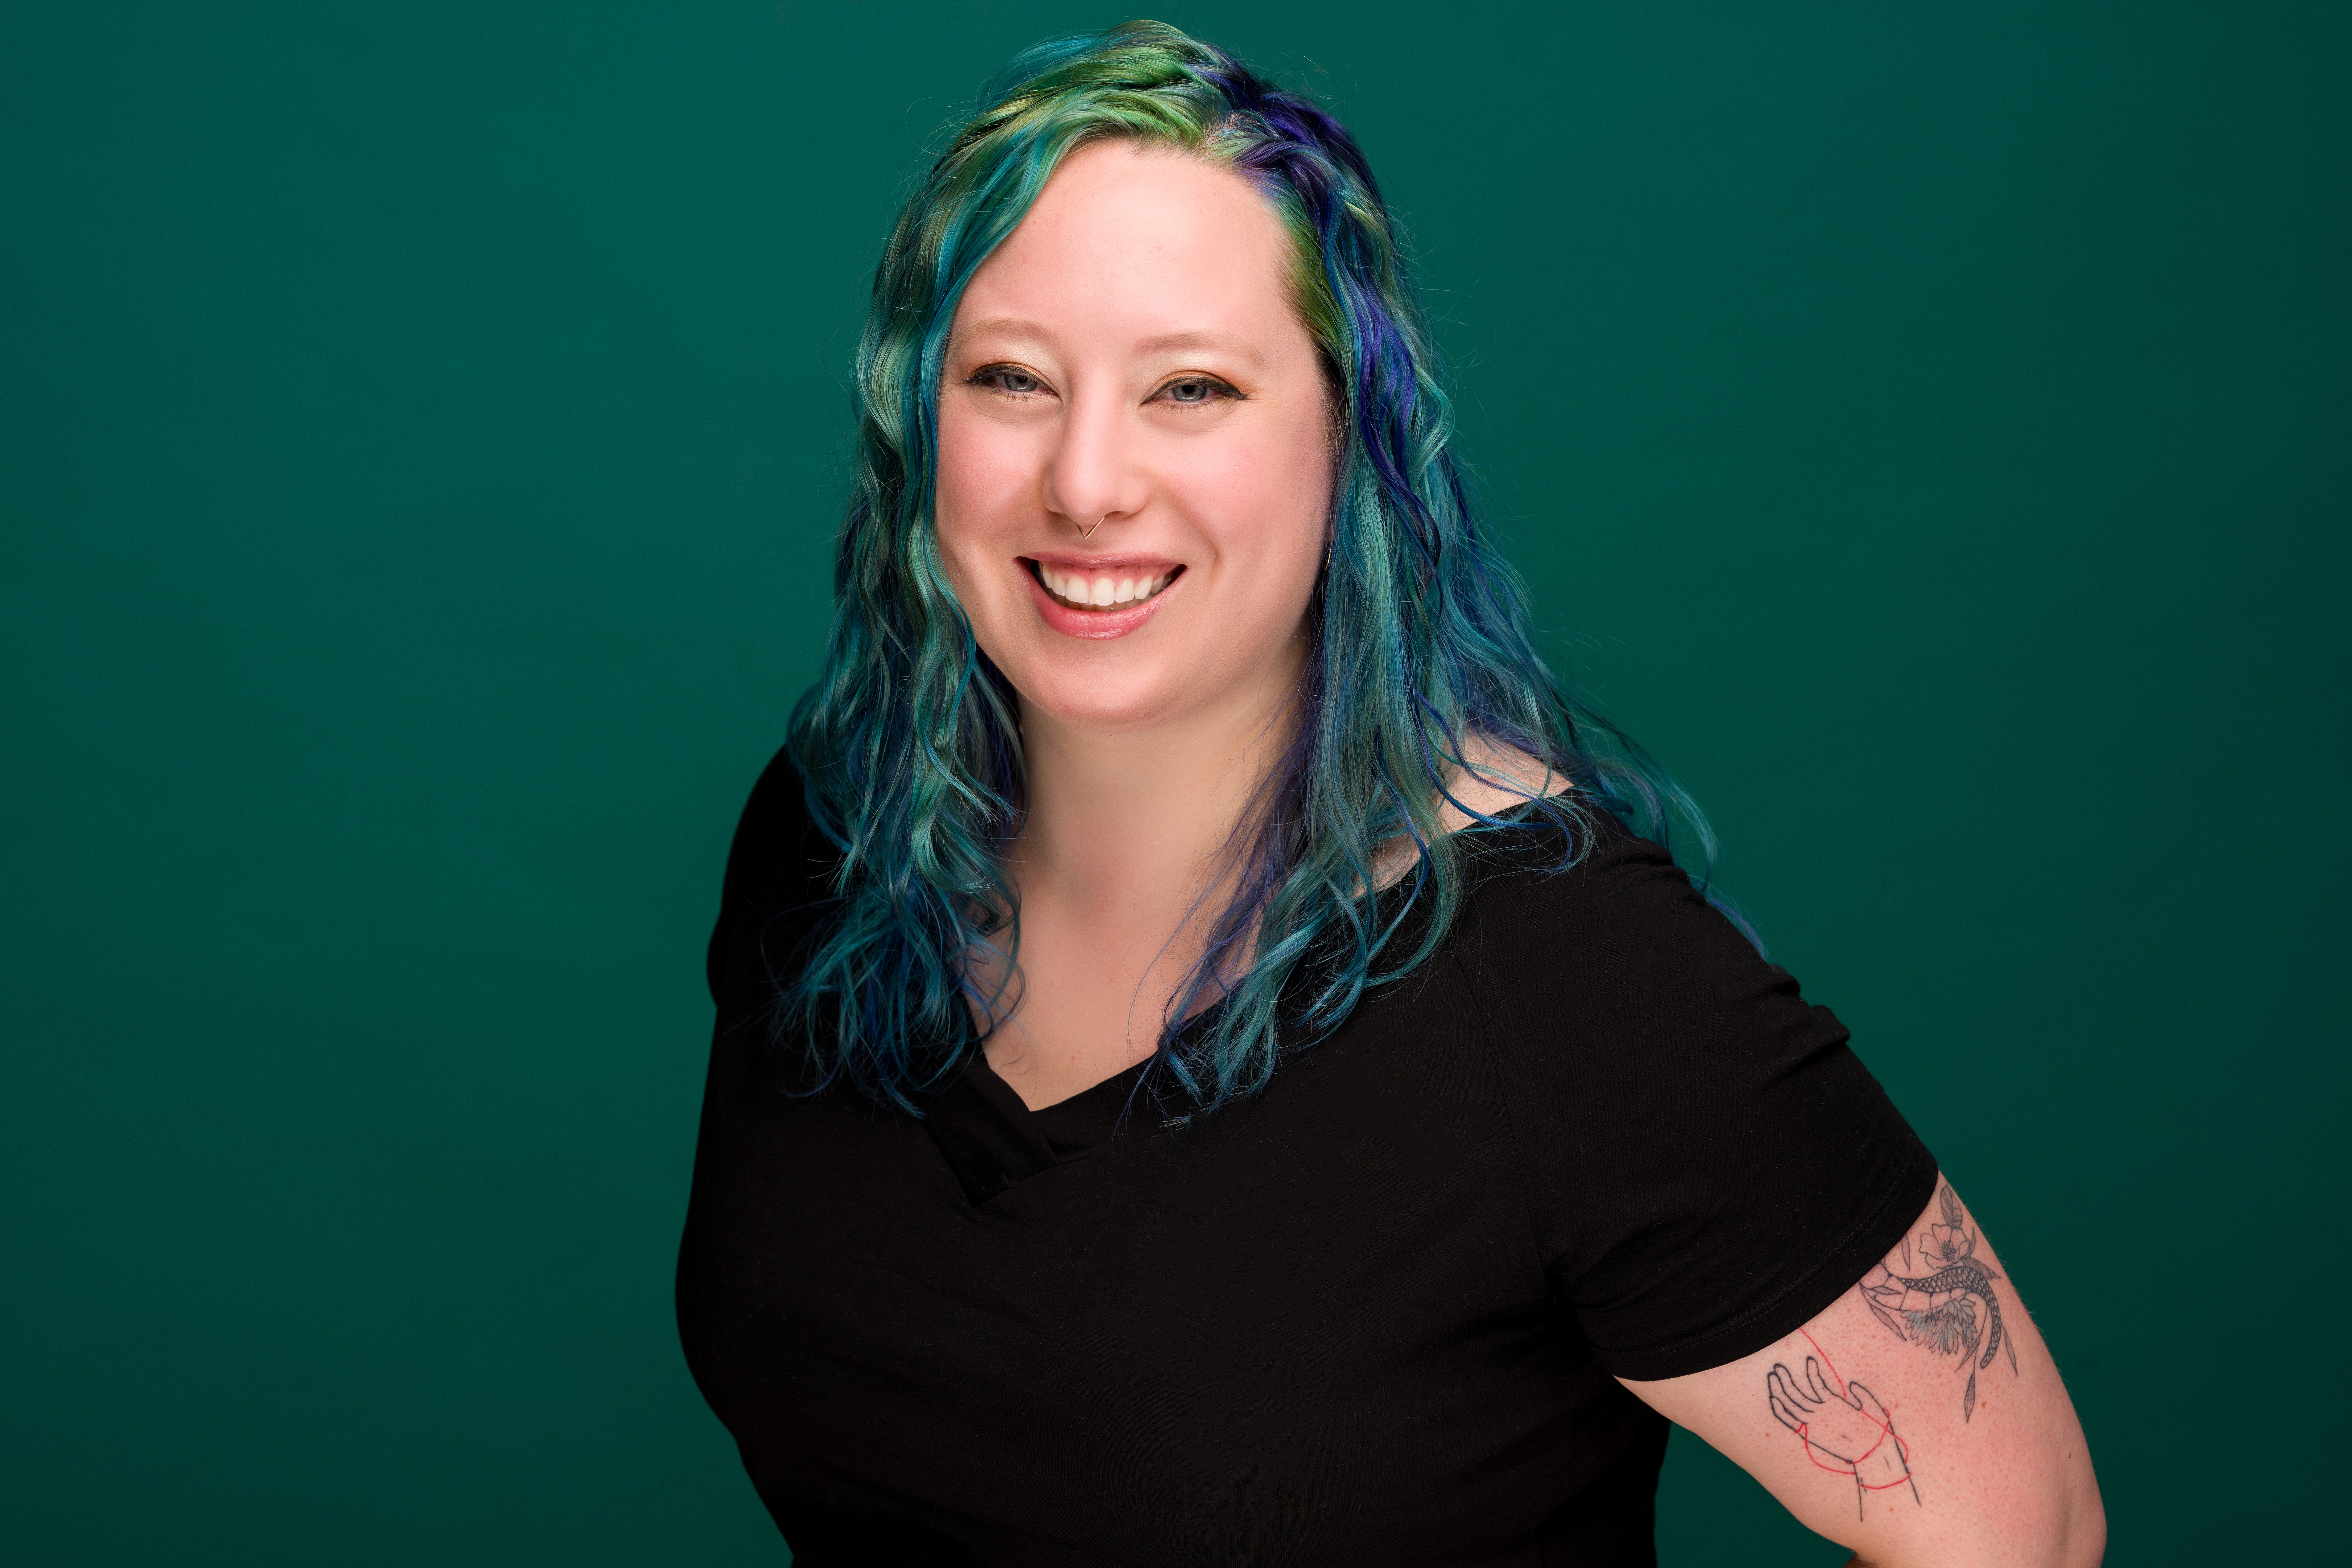 image of kat, a woman with blue and green hair, wearing a black shirt. she is angled toward the camera and smiling.